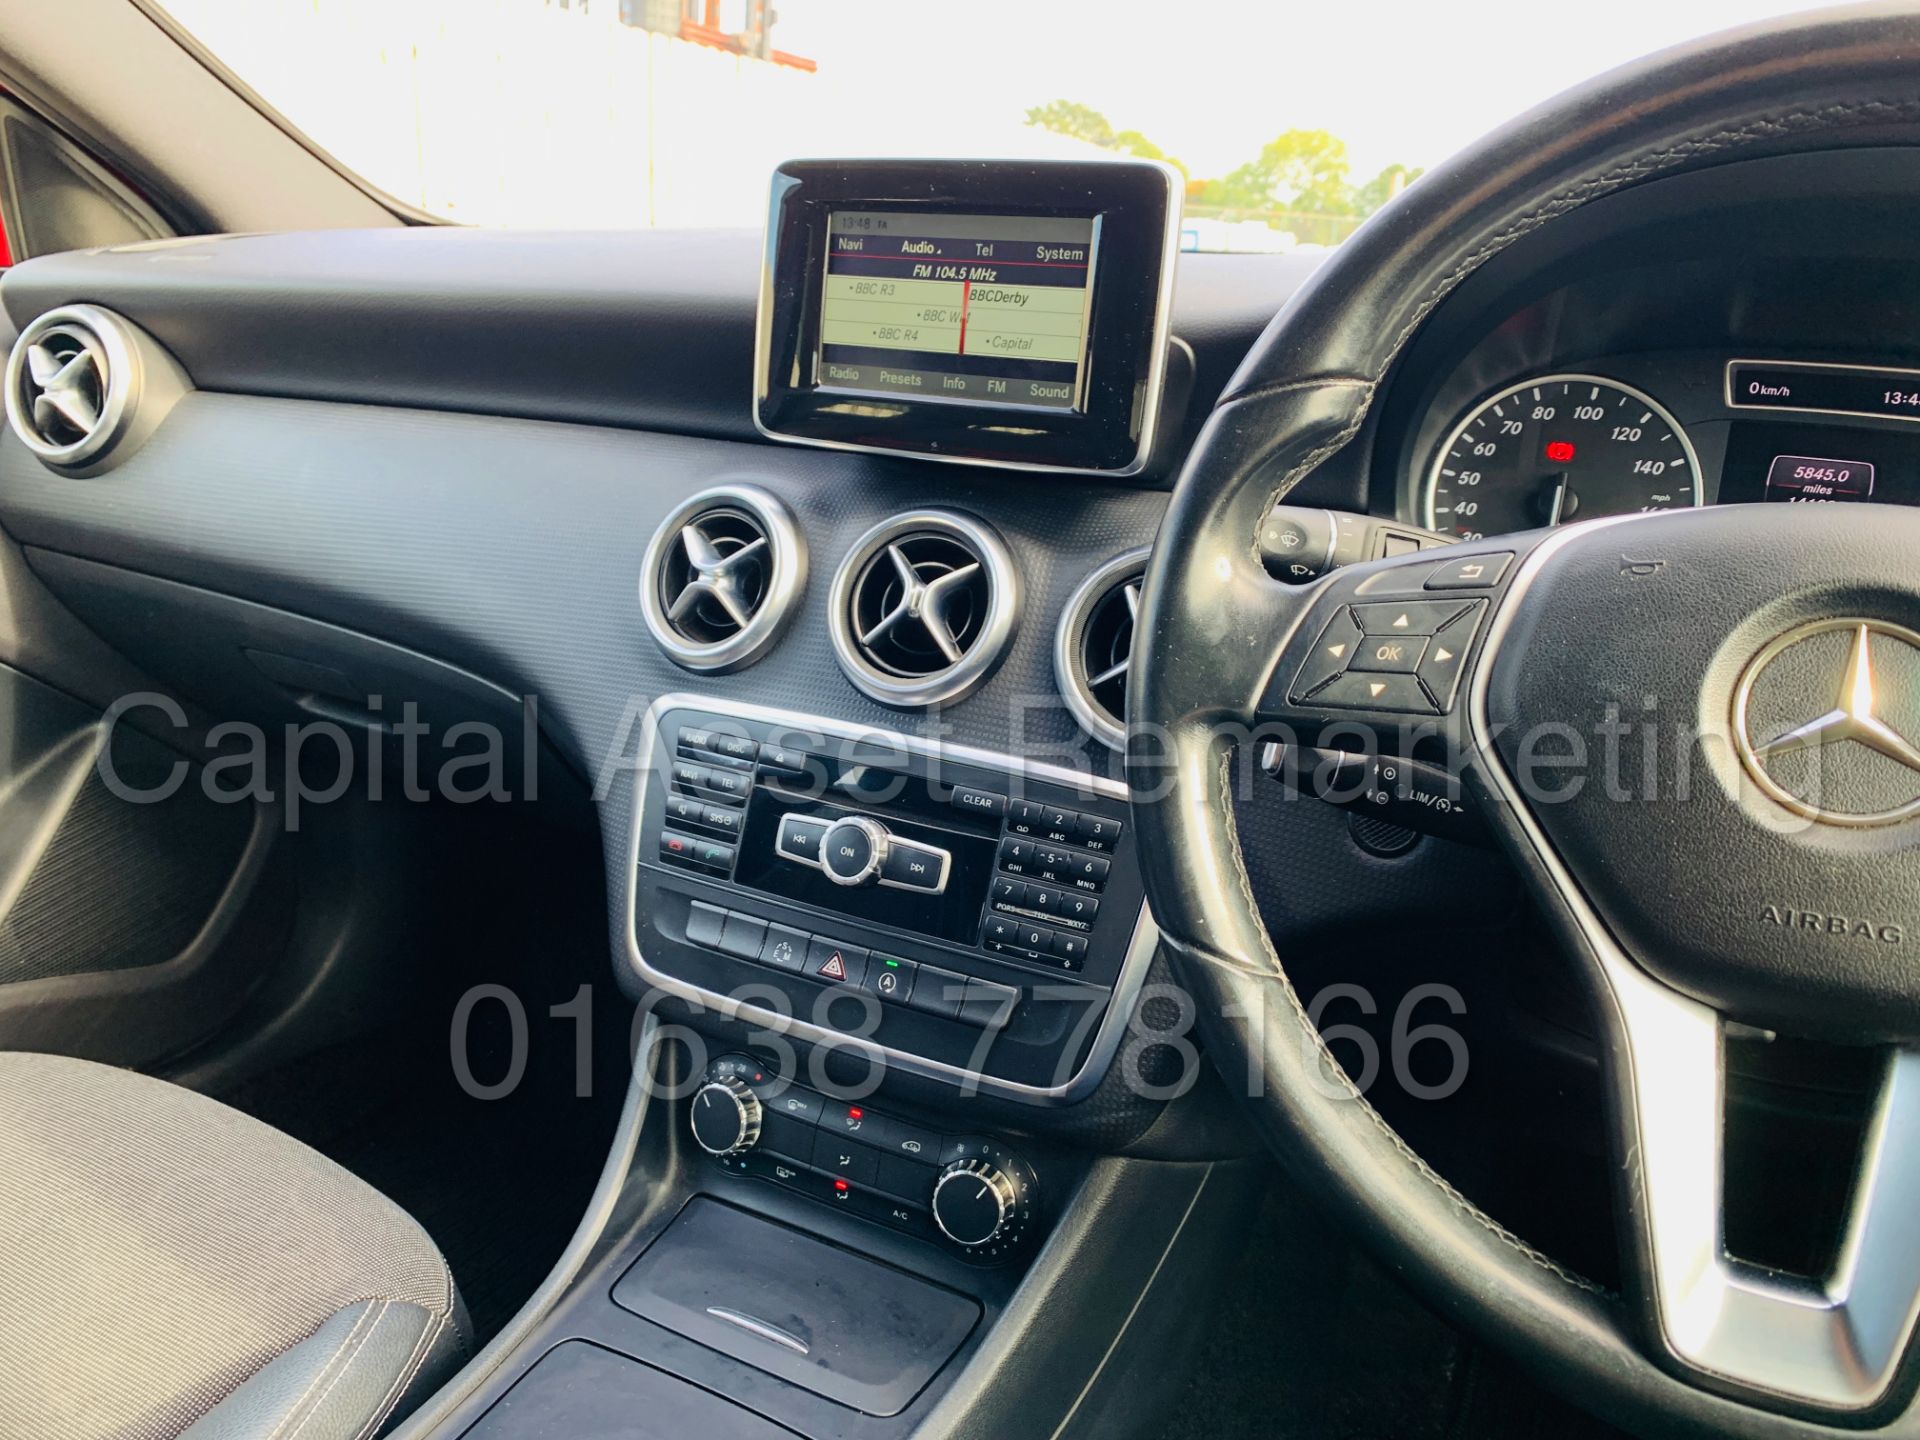 (ON SALE) MERCEDES-BENZ A180 *5 DOOR HATCHBACK* (2015 - NEW MODEL) '1.5 CDI - 7-G TRONIC AUTO' - Image 33 of 43